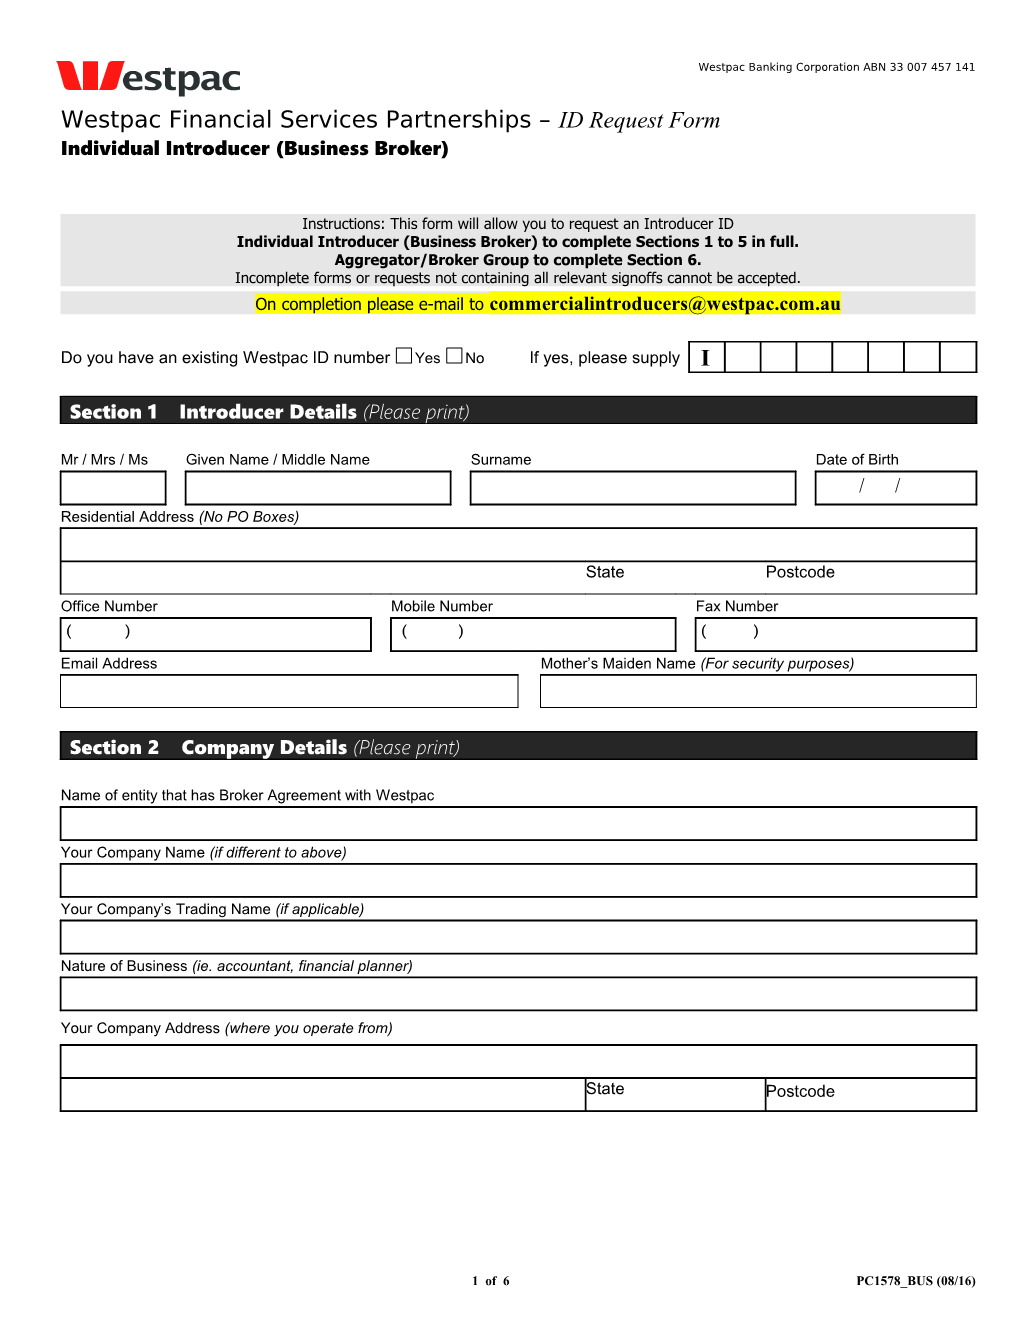 Westpac Financial Services Partnerships ID Request/Introducer Net Form